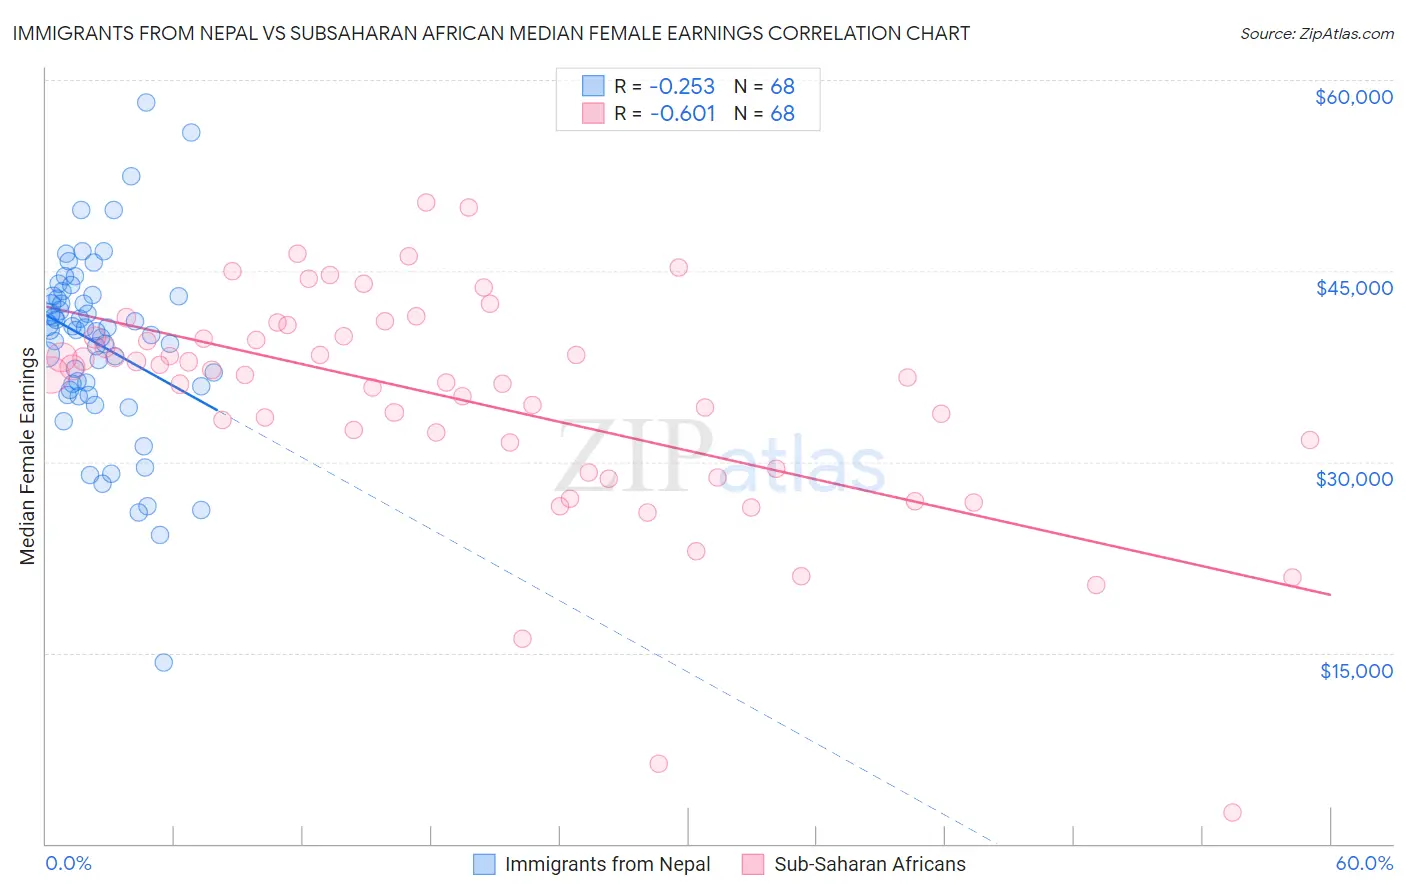 Immigrants from Nepal vs Subsaharan African Median Female Earnings